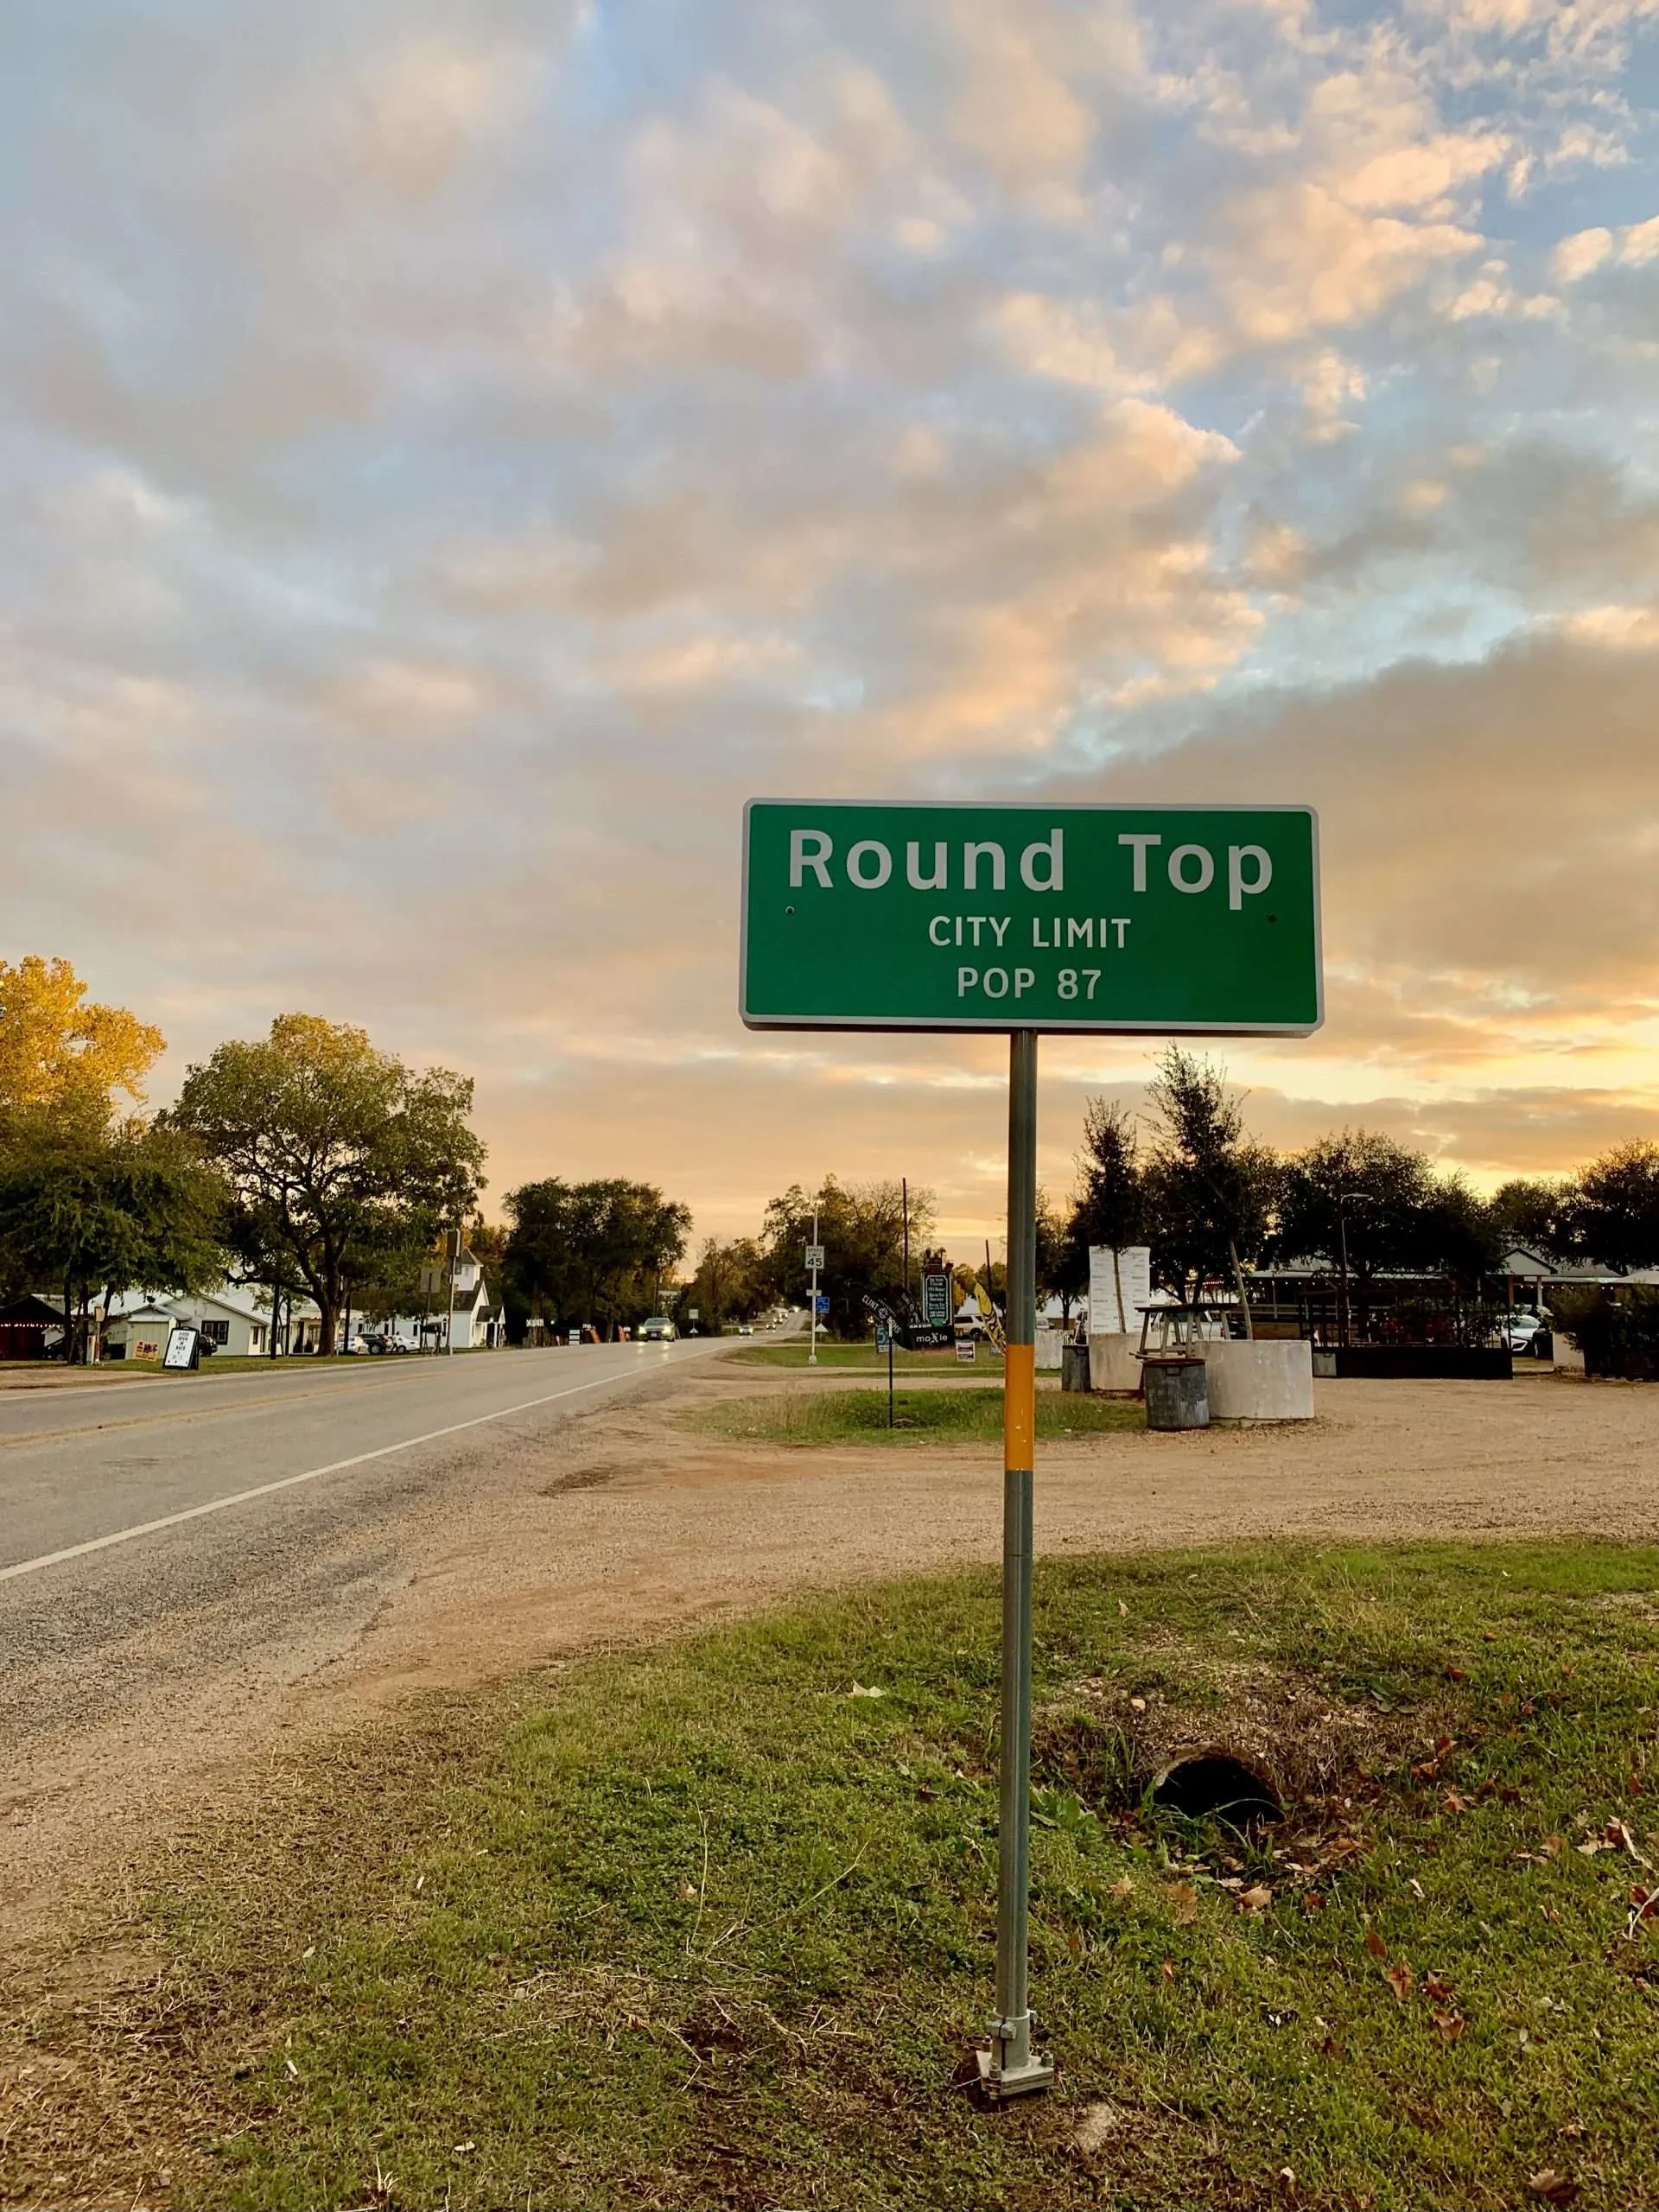 Round Top, Texas is home of the famous Round Top Antique Show